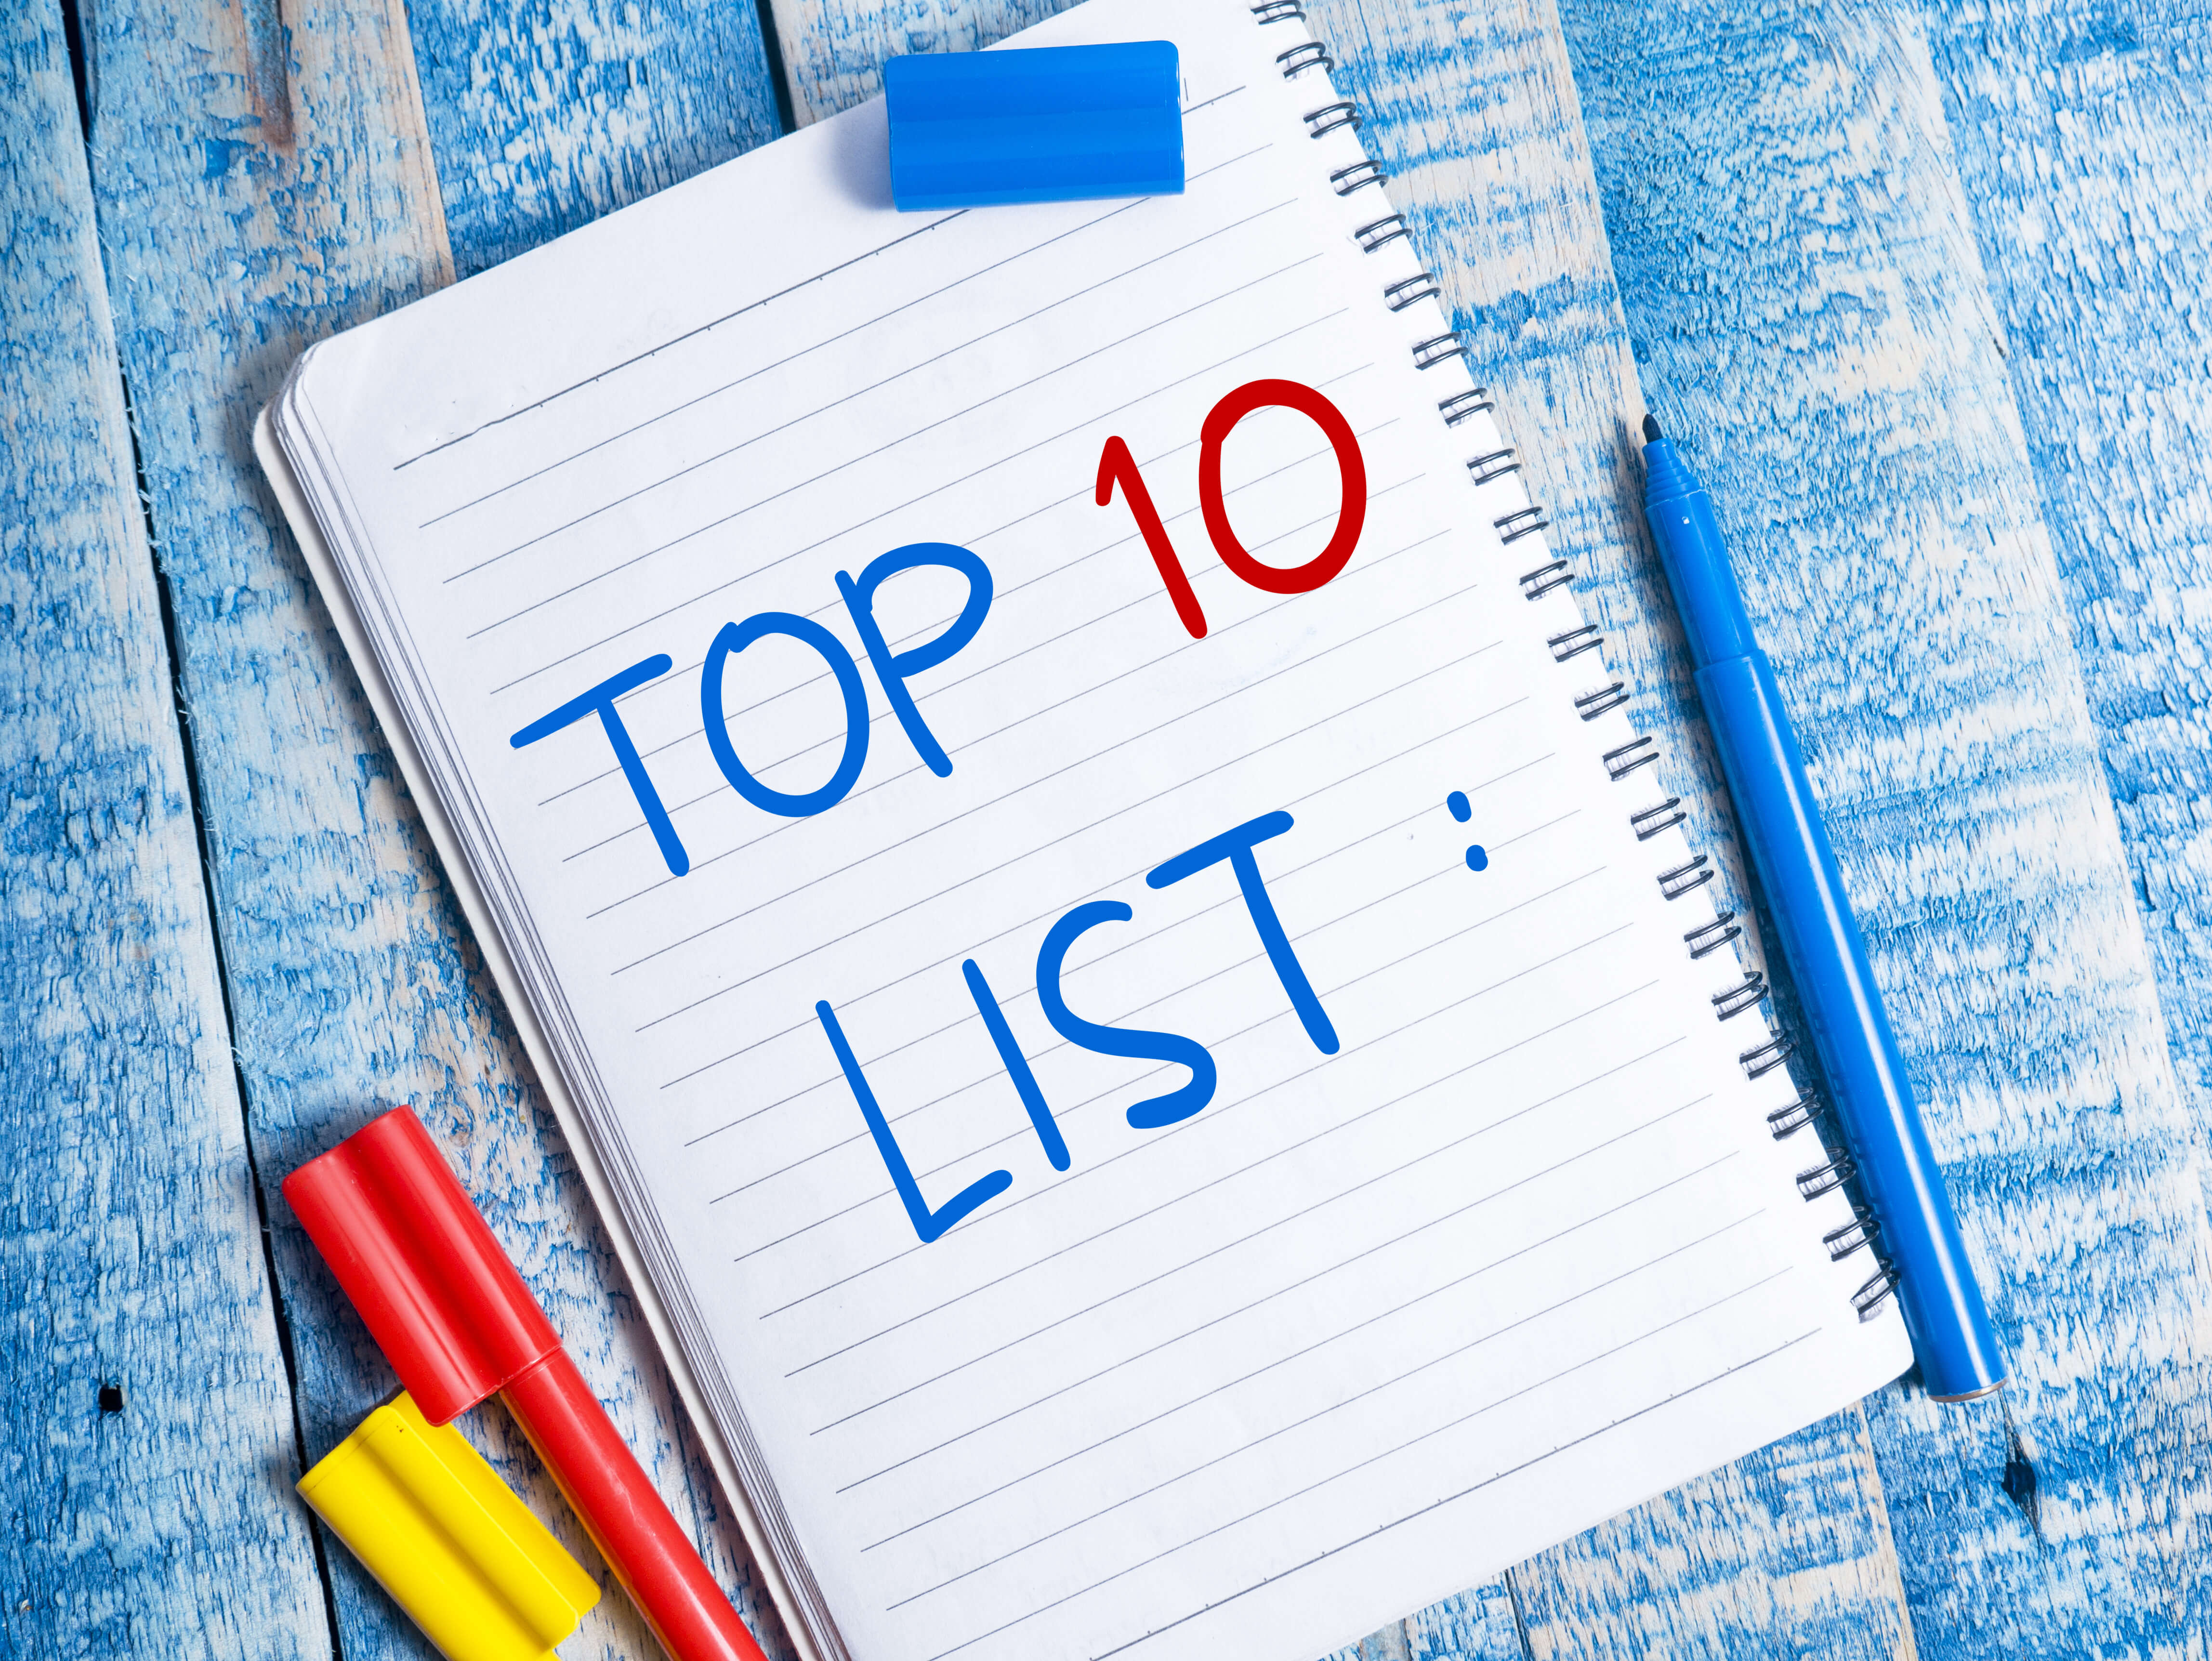 What Are 10 Tips to Ace The USMLE® Step 1 or COMLEX®  Step 1